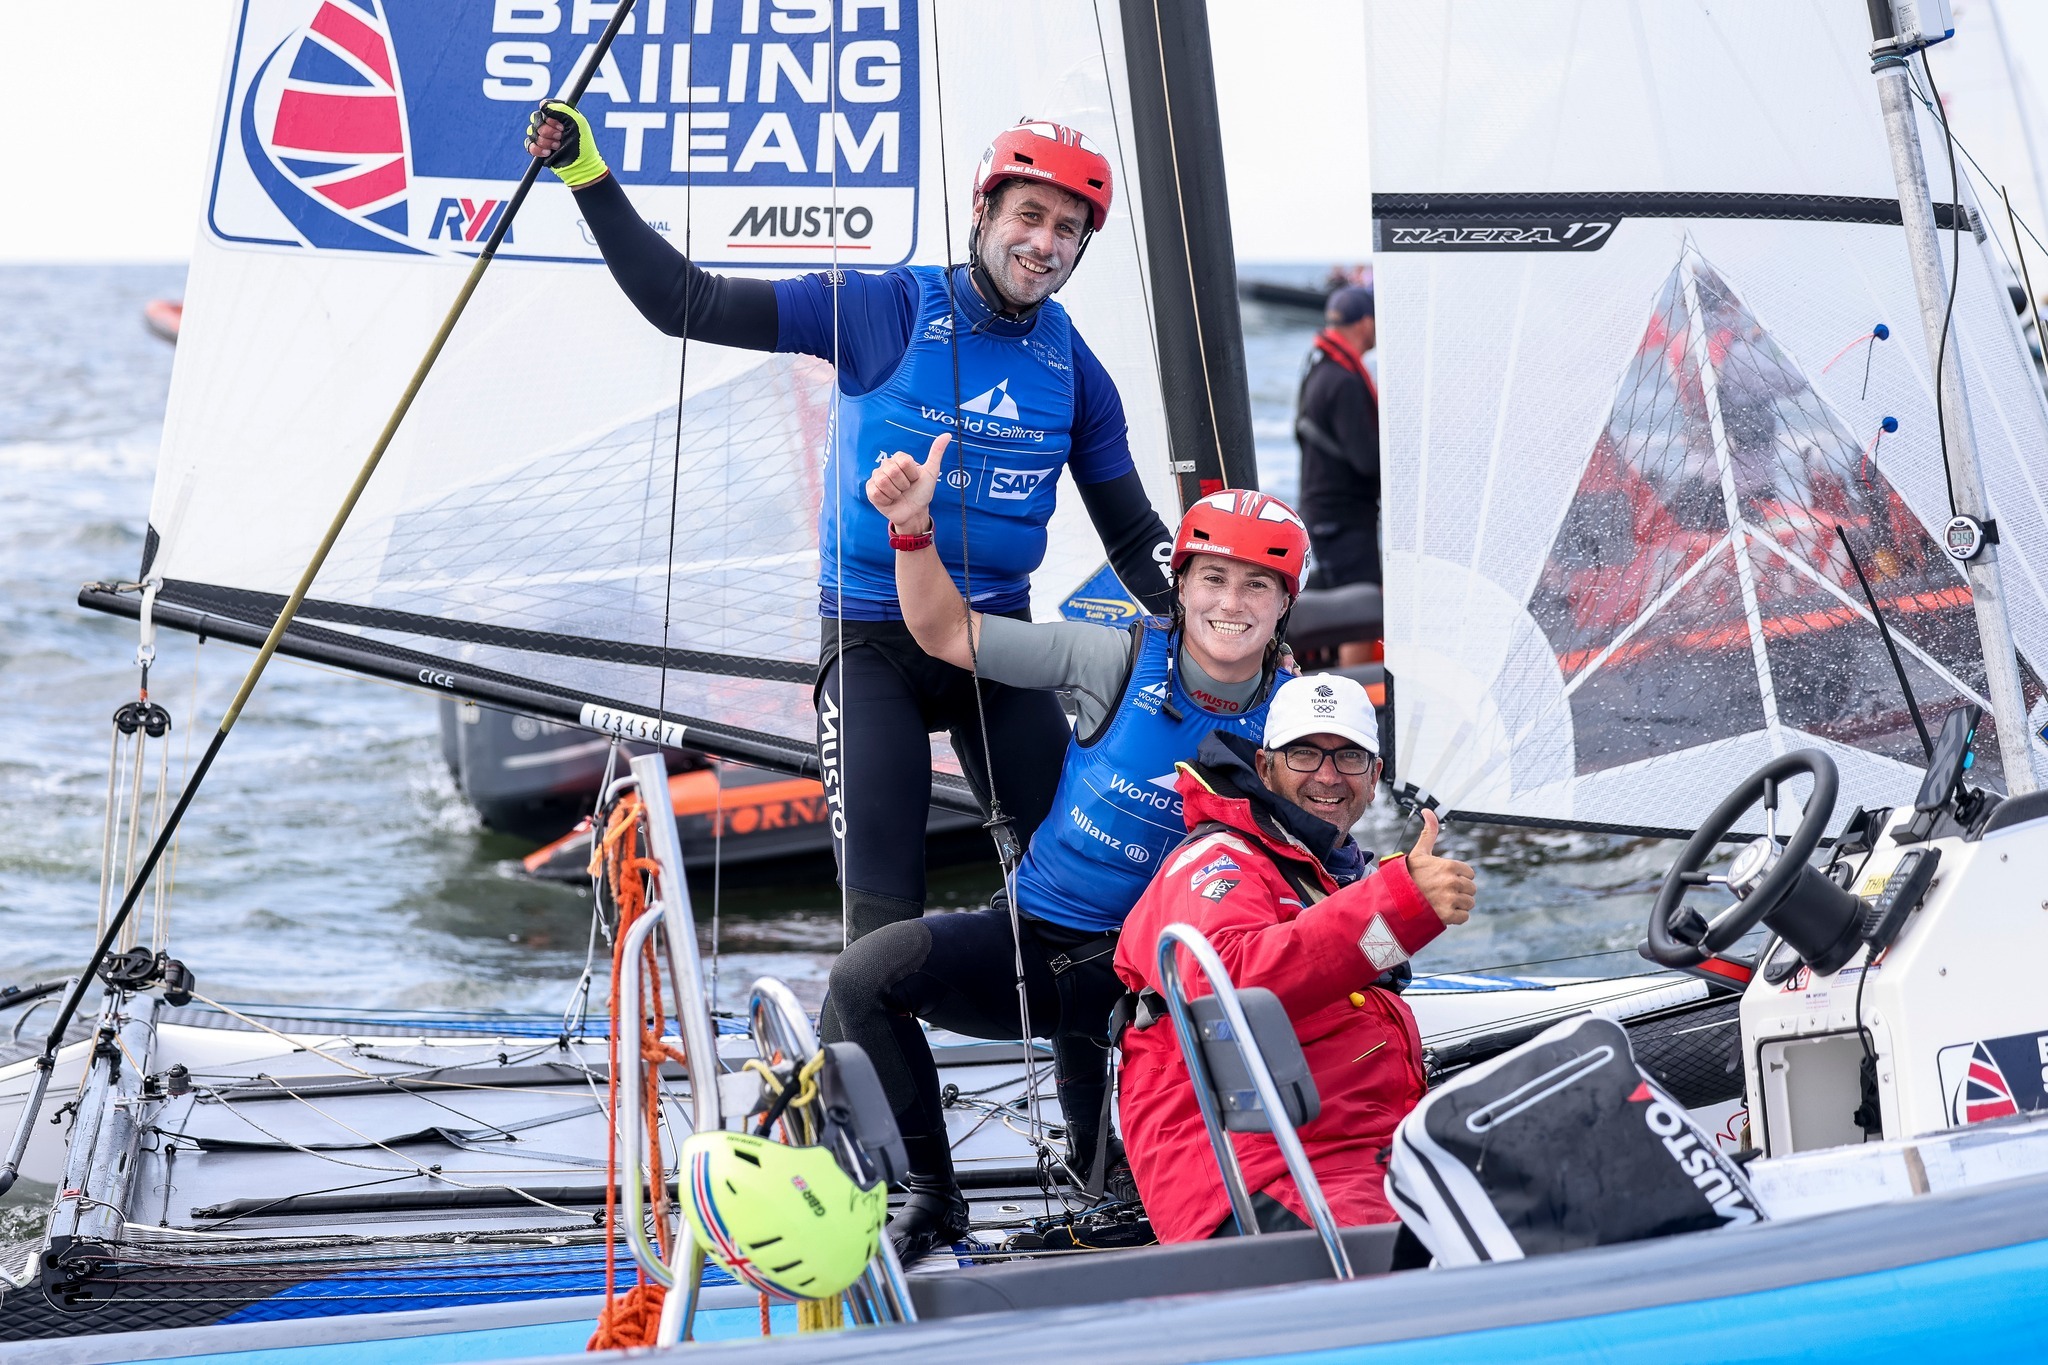 The Hague, The Netherlands is hosting the 2023 Allianz Sailing World Championships from 11th to 20th August 2023. More than 1200 sailors from 80 nations are racing across ten Olympic sailing disciplines. Paris 2024 Olympic Sailing Competition places will